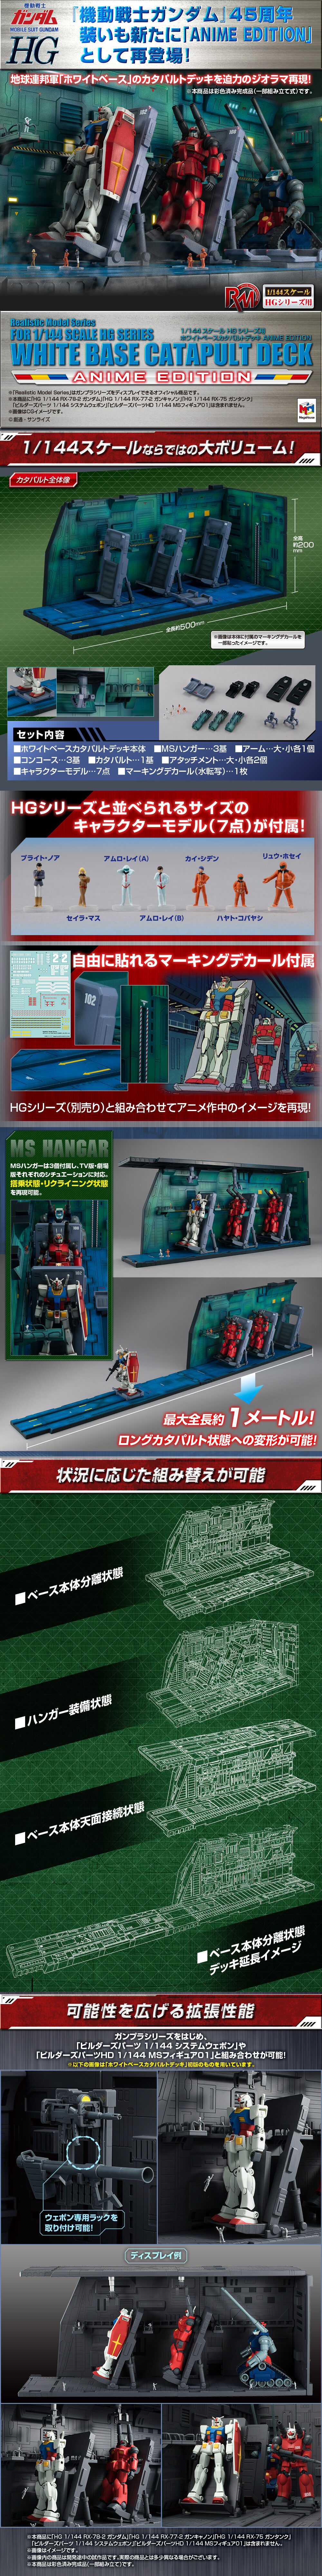 RMS for 1/144 Scale HGUC Series : E.F.S.F. Pegasus-Class Assault Landing Craft SCV-70 White Base Catapult Deck(Anime Edition)